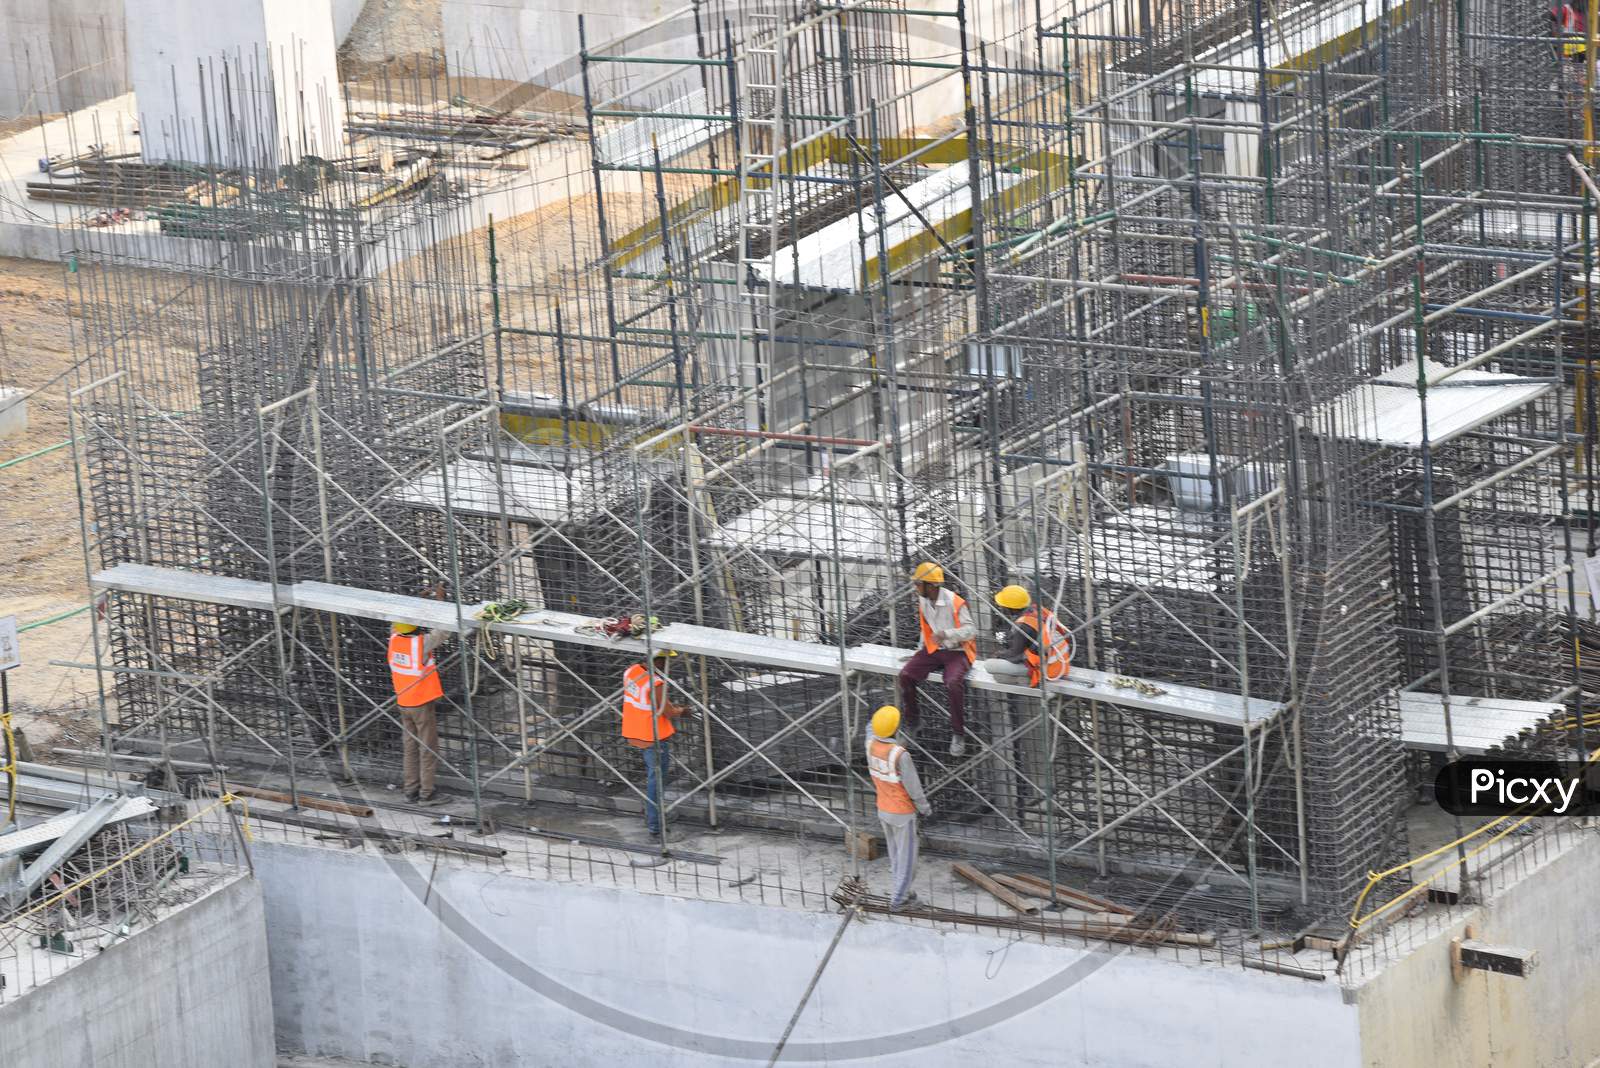 Construction workers in a site